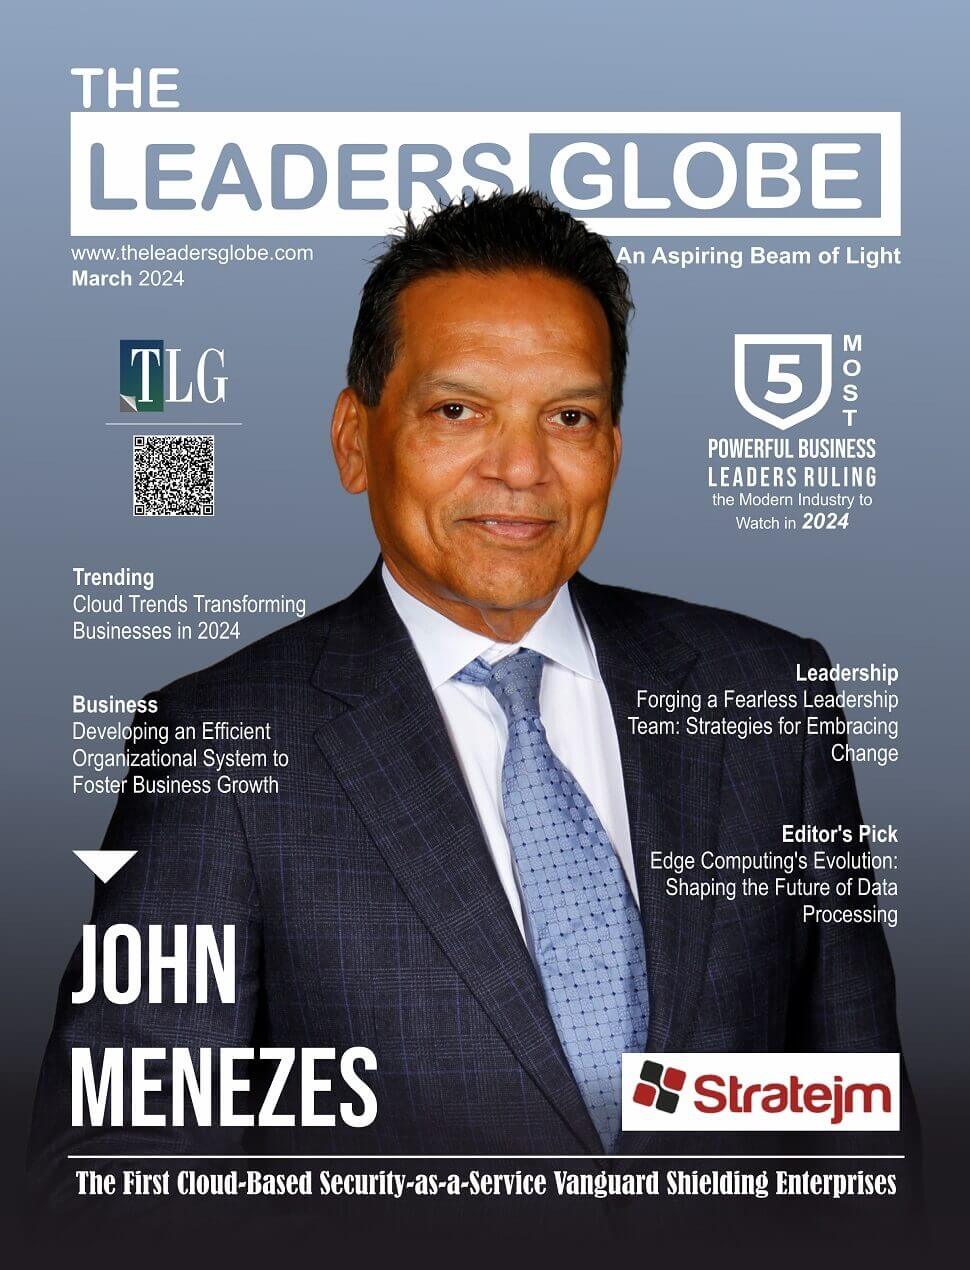 5 MOST POWERFUL BUSINESS LEADERS RULING THE MODERN INDUSTRY TO WATCH IN 2024 VOL4